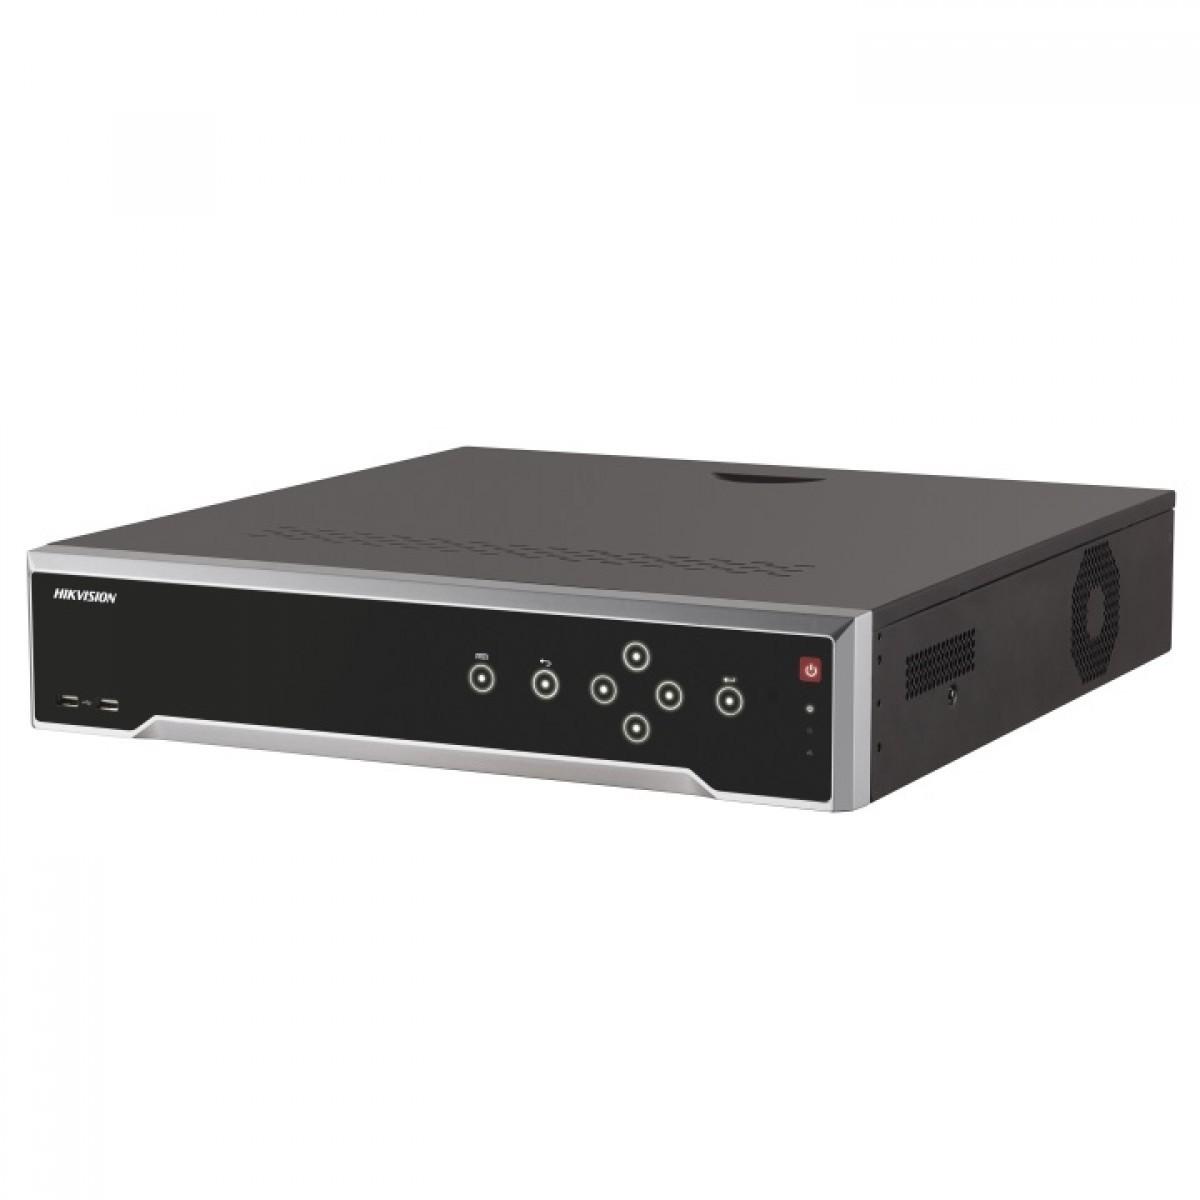 NVR 16 canale 8 MP, 160 MBps, 4 x HDD, Hikvision DS-7716NI-K4